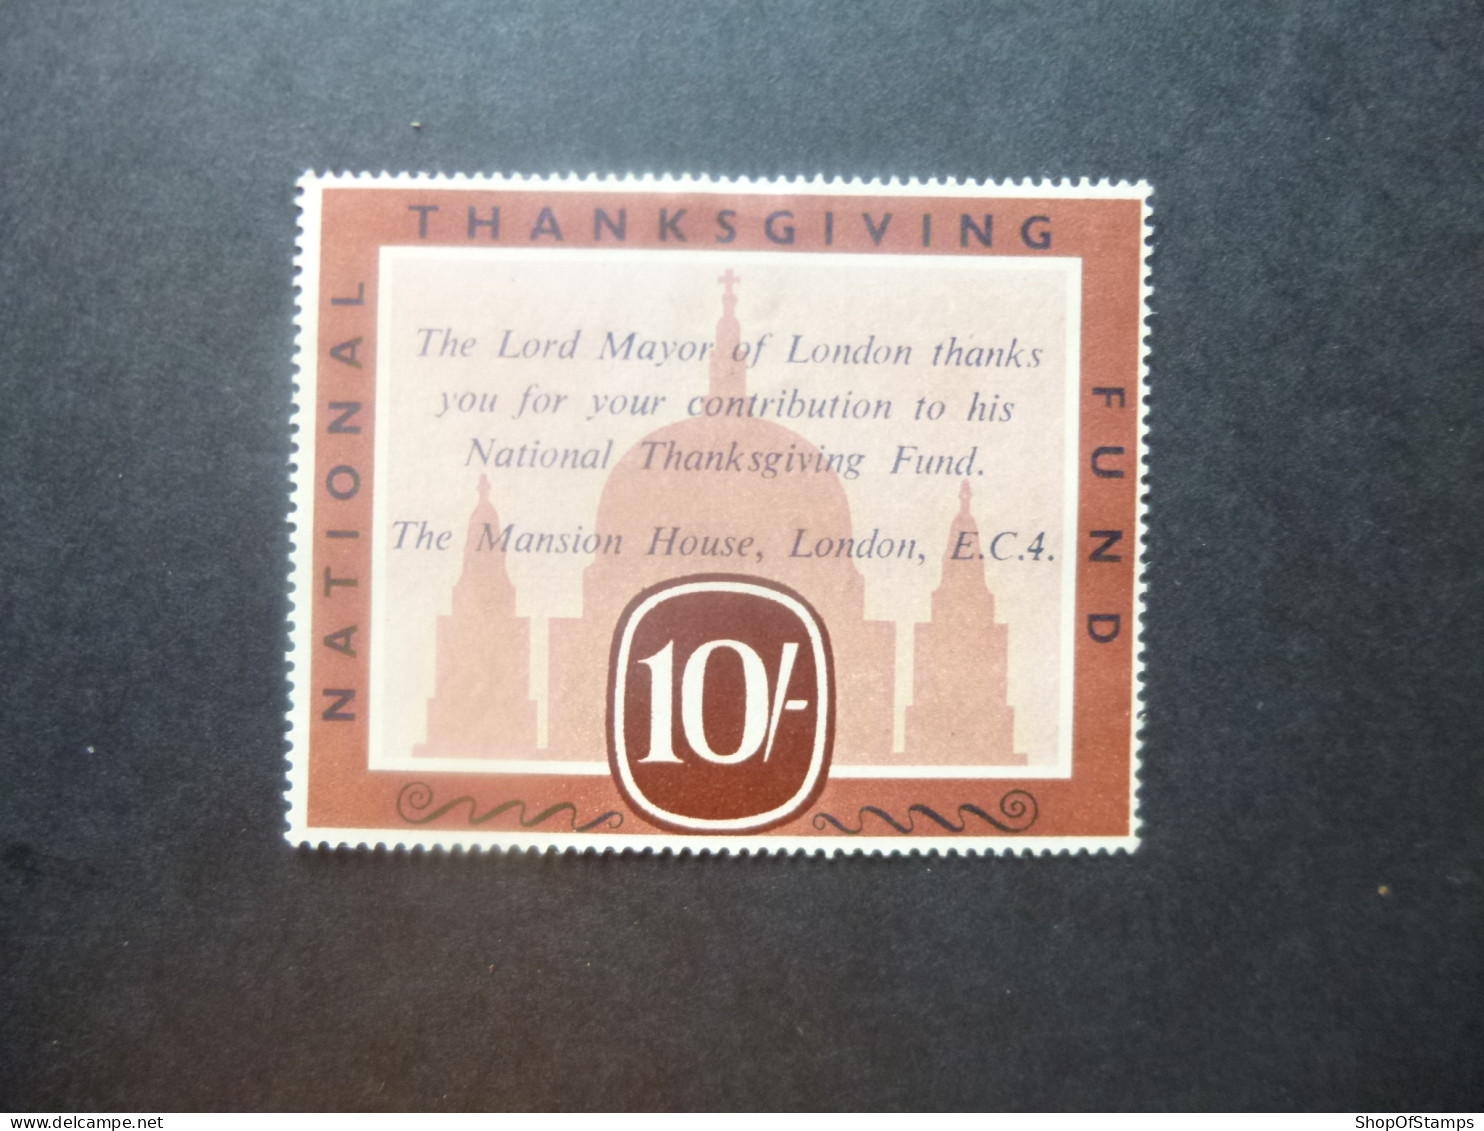 GREAT BRITAIN LABEL NATIONAL THANKS GIVING FUND OF LORD MAYOR LONDON 10sh SG NATIONAL THANKS GIVING FUND LABEL 10s - Werbemarken, Vignetten